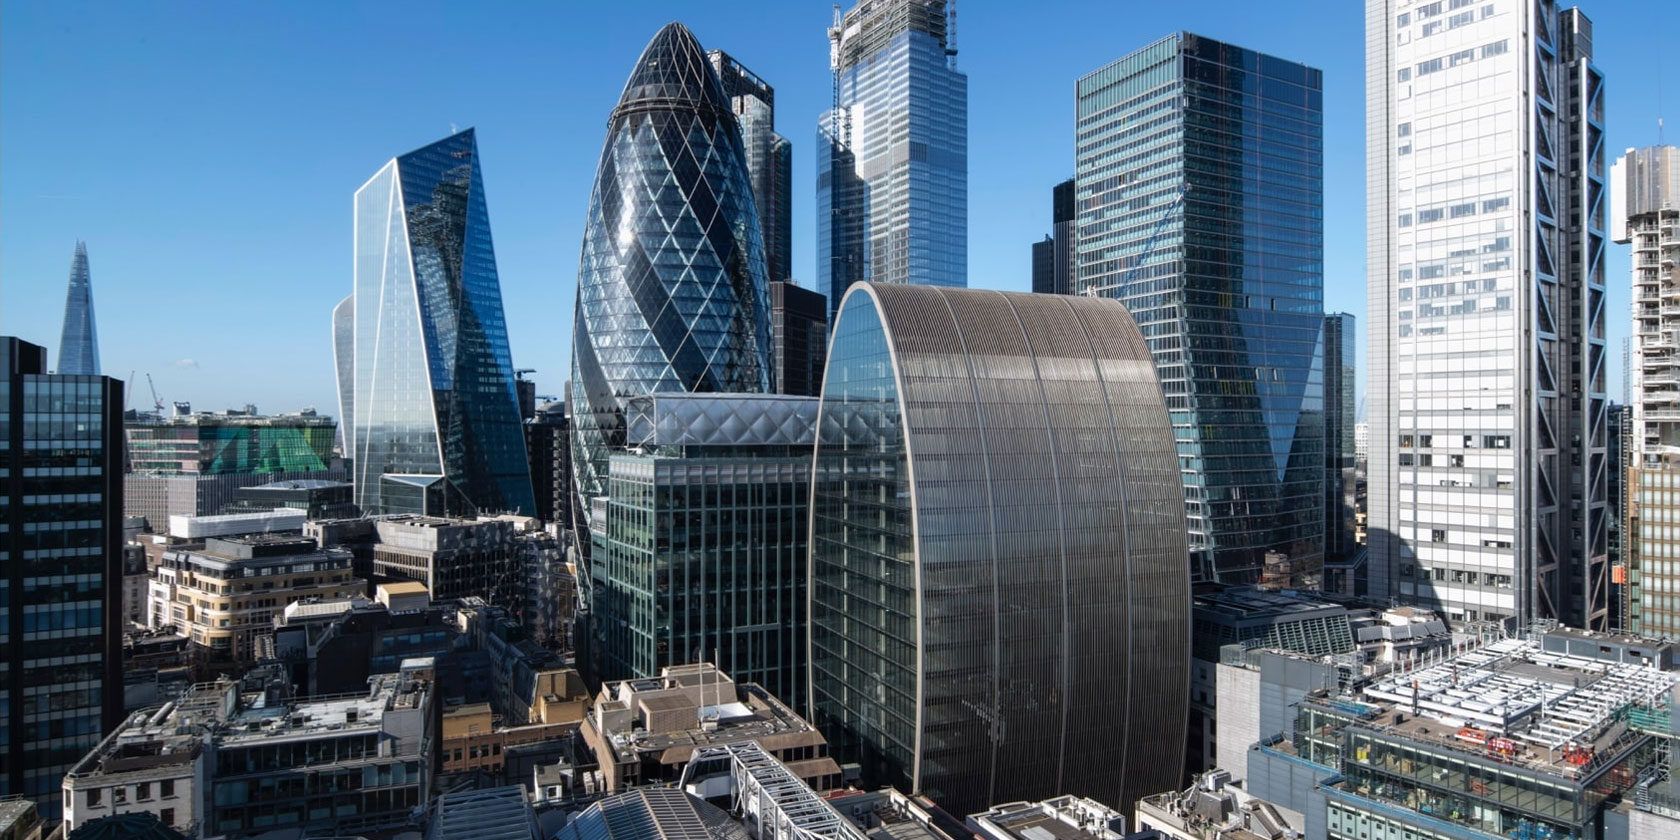 Vattenfall's office at St Mary Axe in London.  Image credit: James Reid